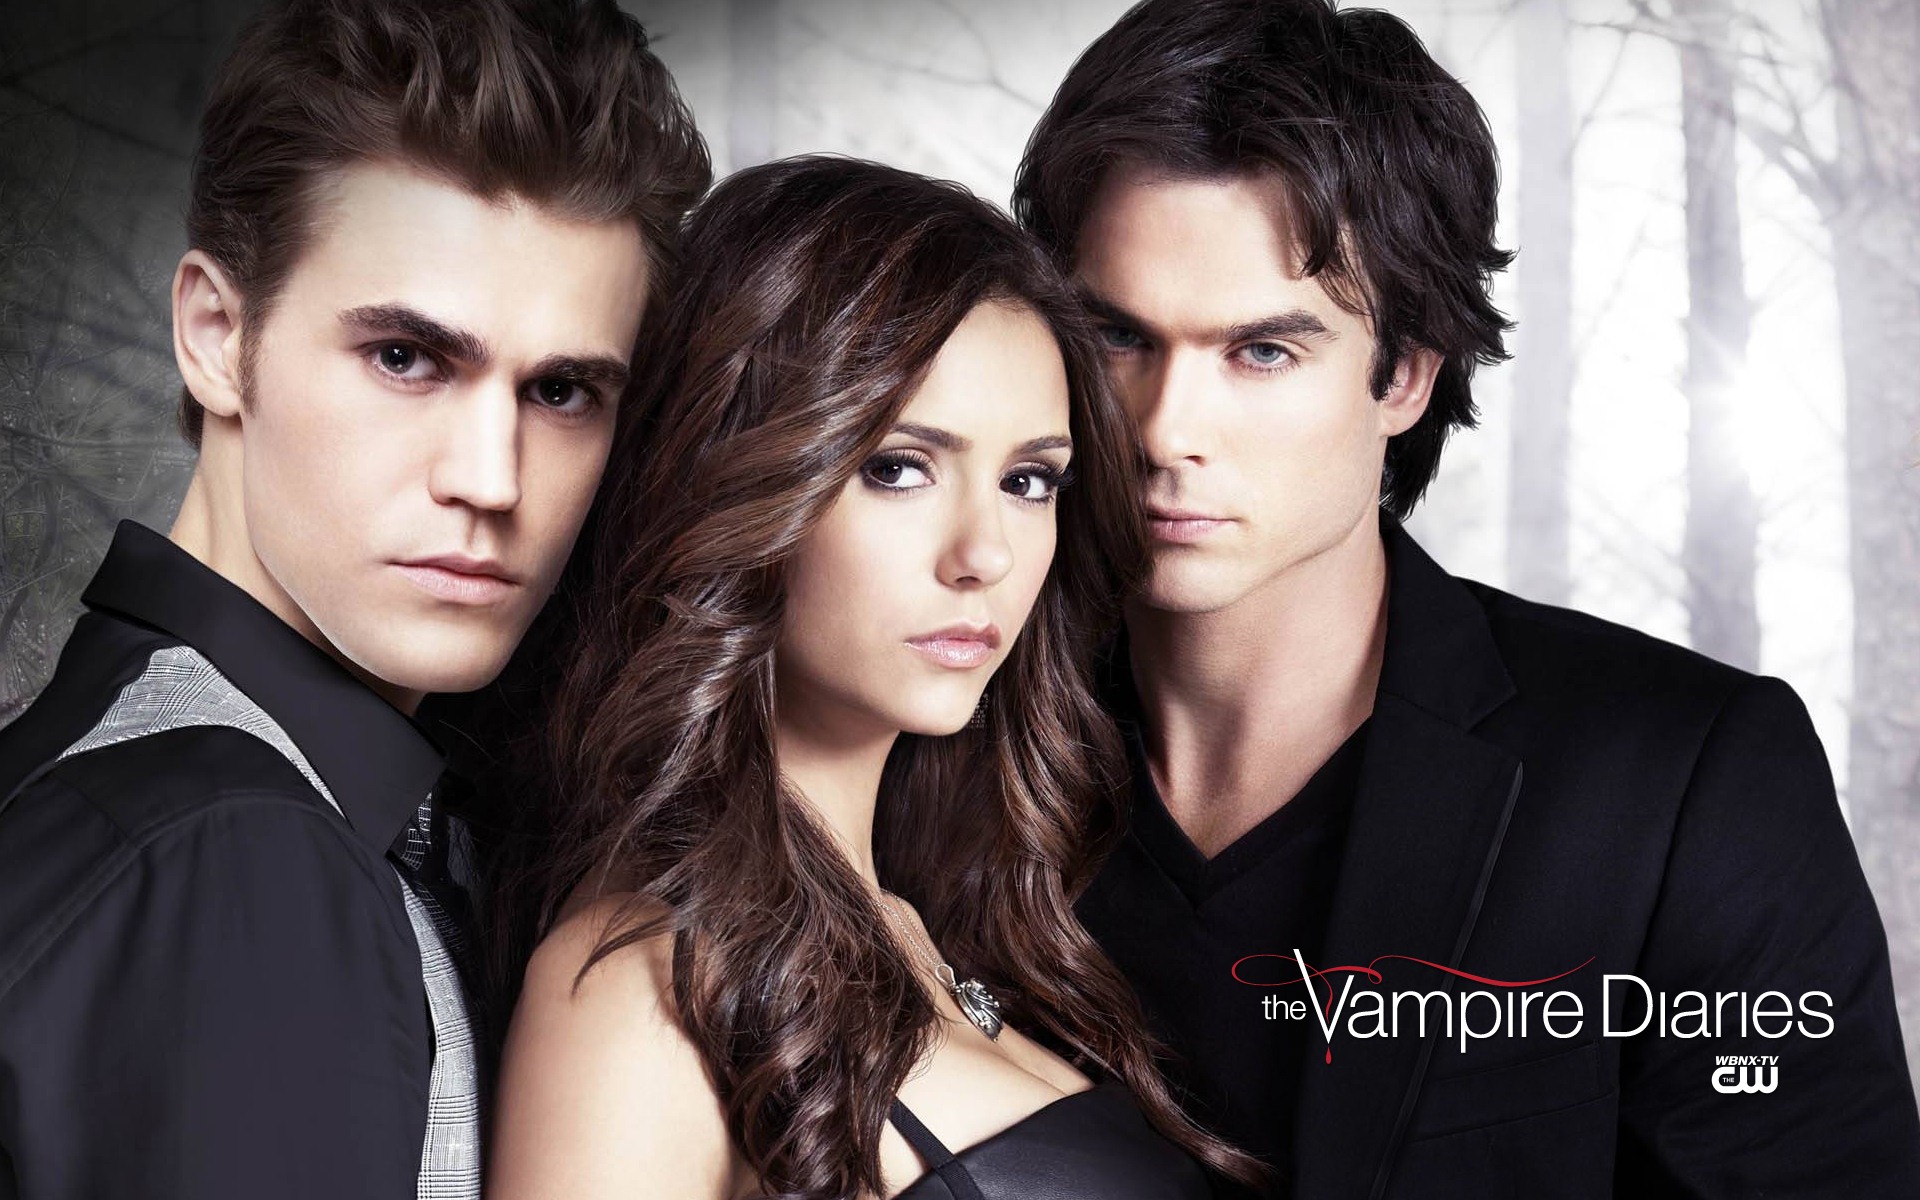 The Vampire Diaries HD Wallpapers #1 - 1920x1200